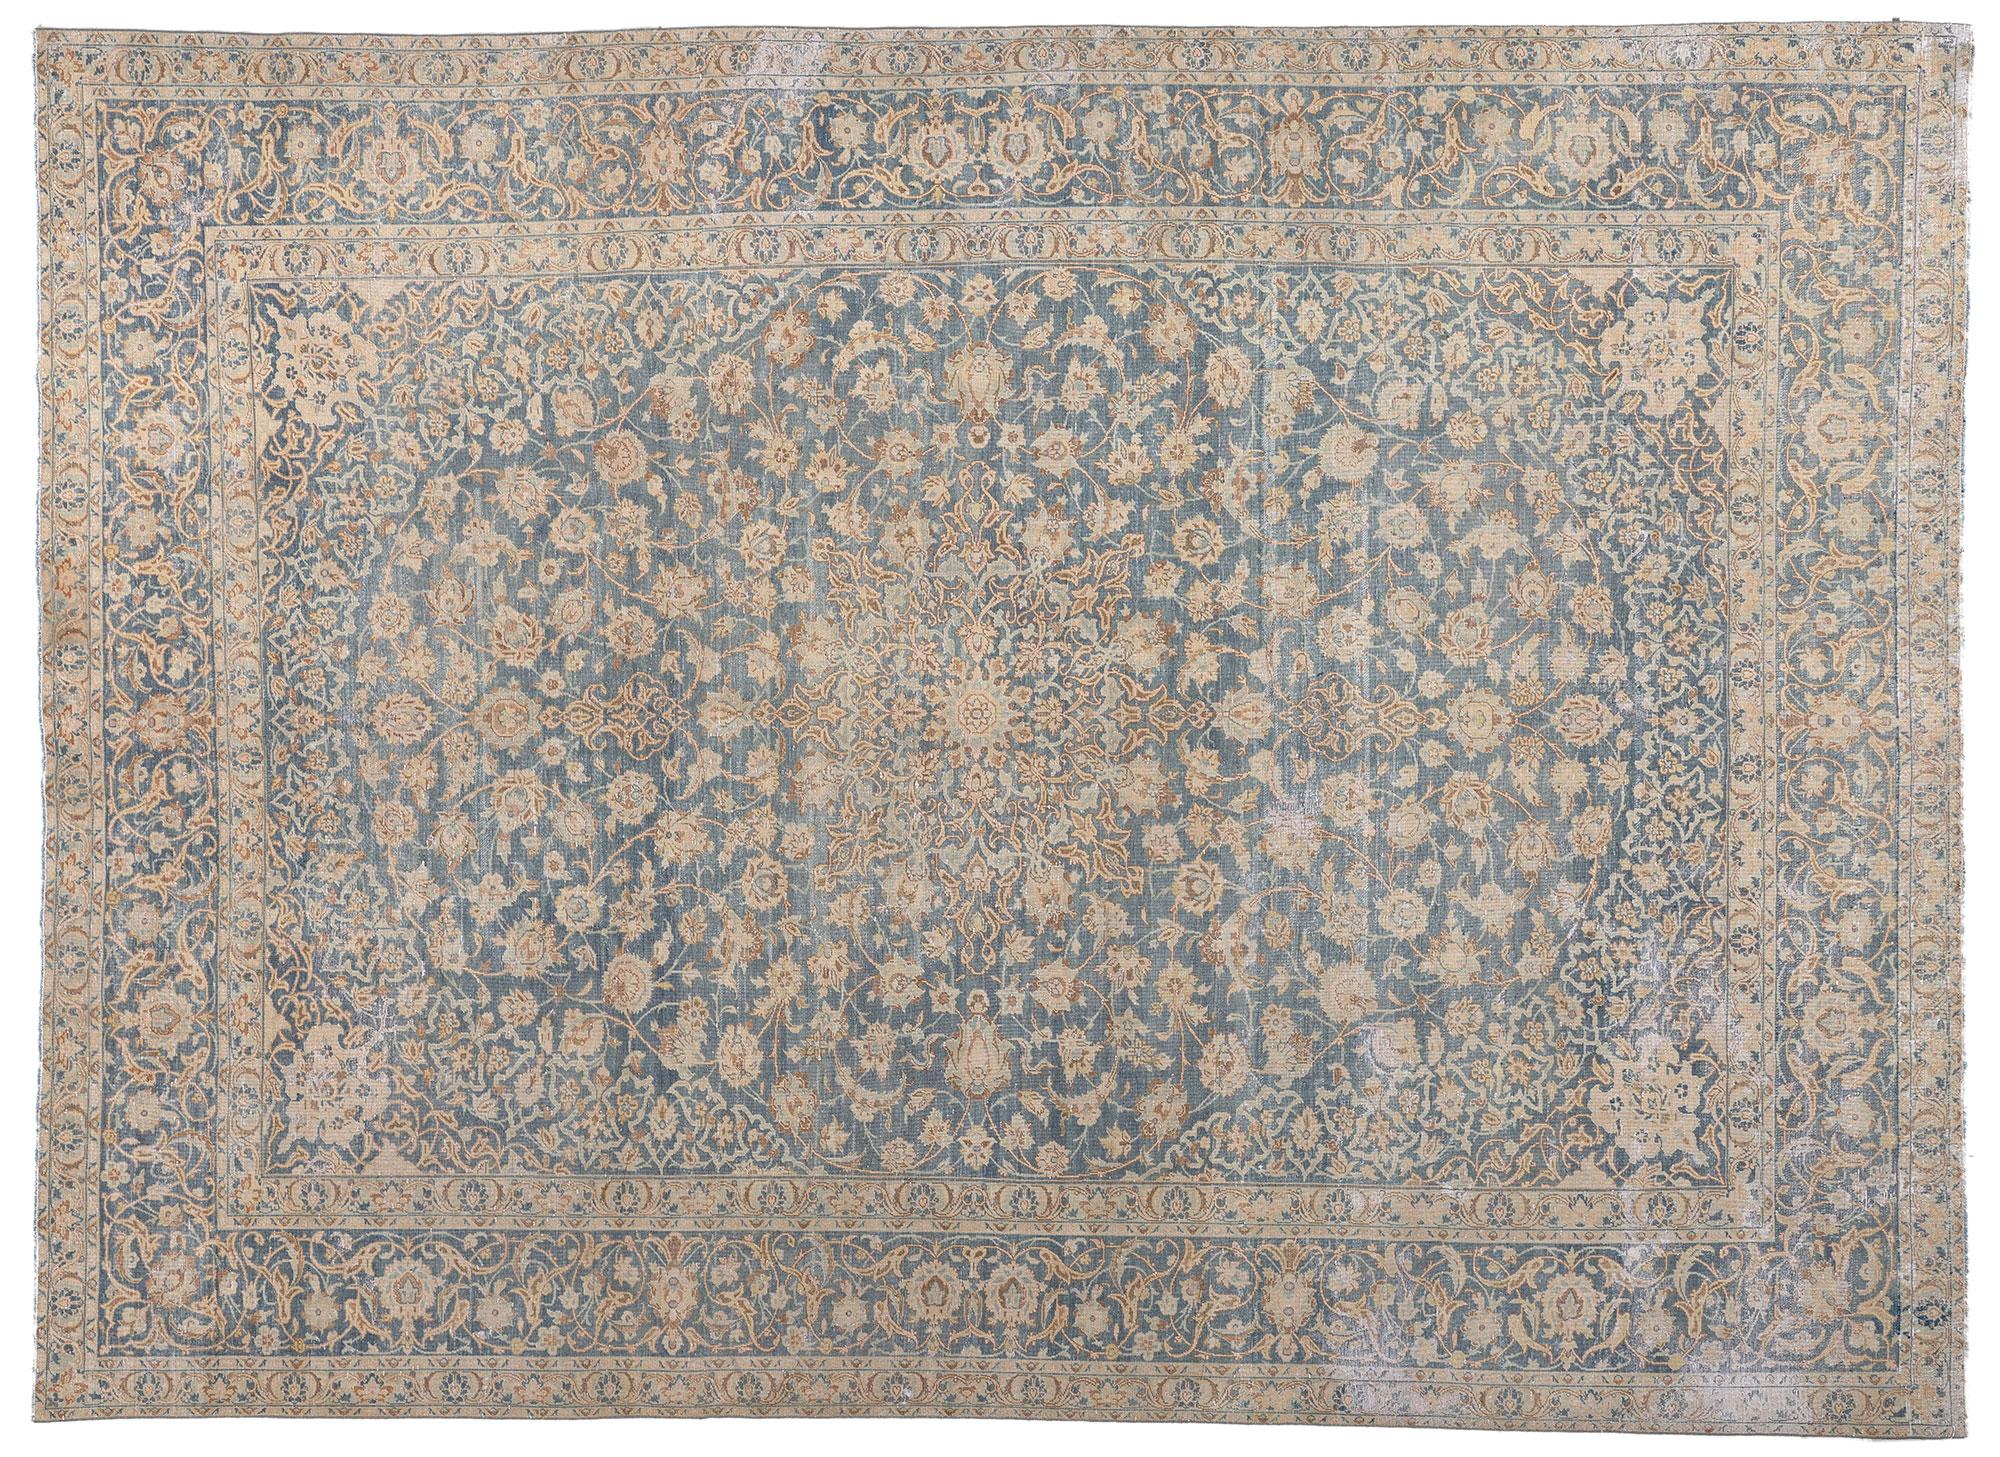 Distressed Antique Persian Tabriz Rug, Faded Soft Earth-Tone Colors For Sale 4